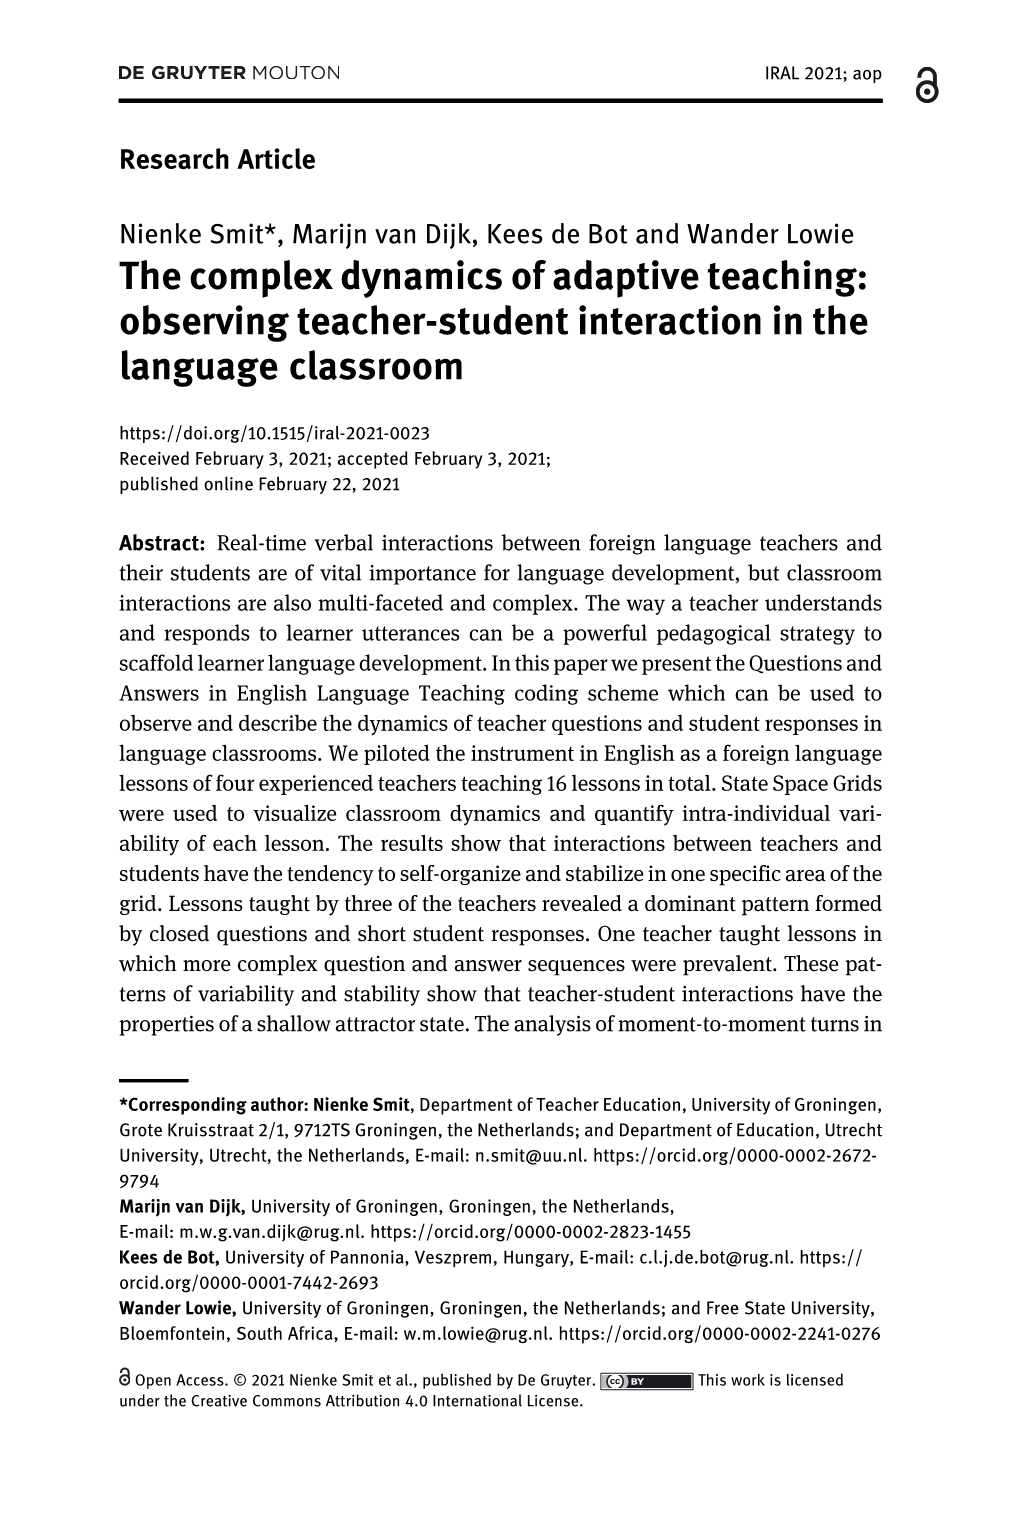 The Complex Dynamics of Adaptive Teaching: Observing Teacher-Student